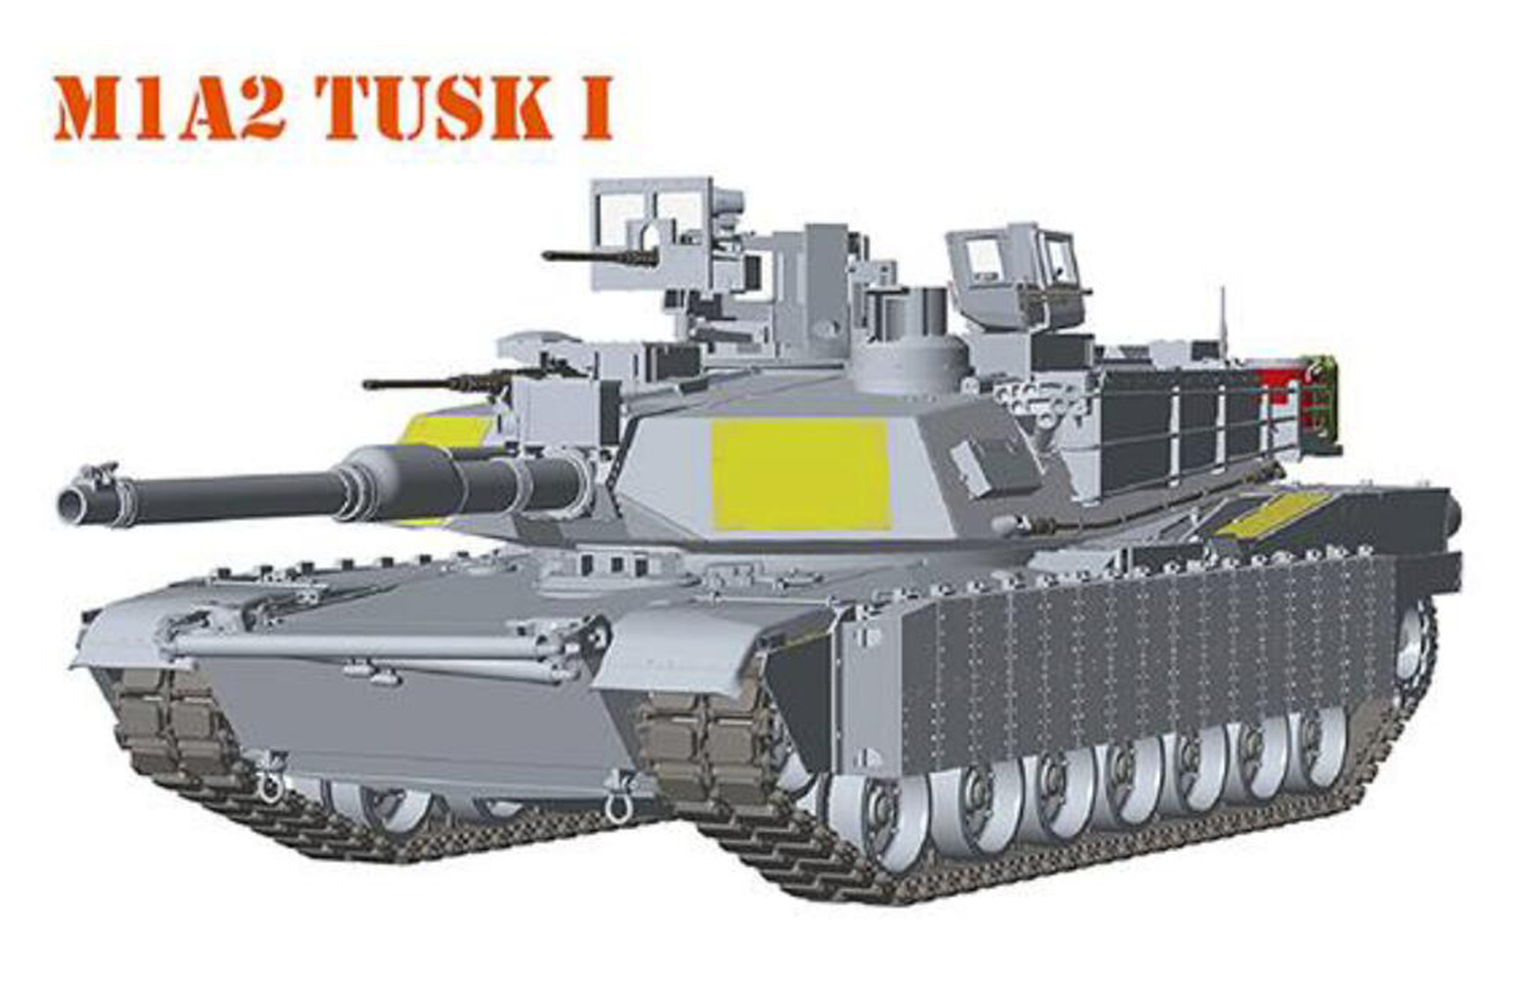 M1A1 TUSK I / M1A2 TUSK I/ TUSKII 3 in 1 with workable track links